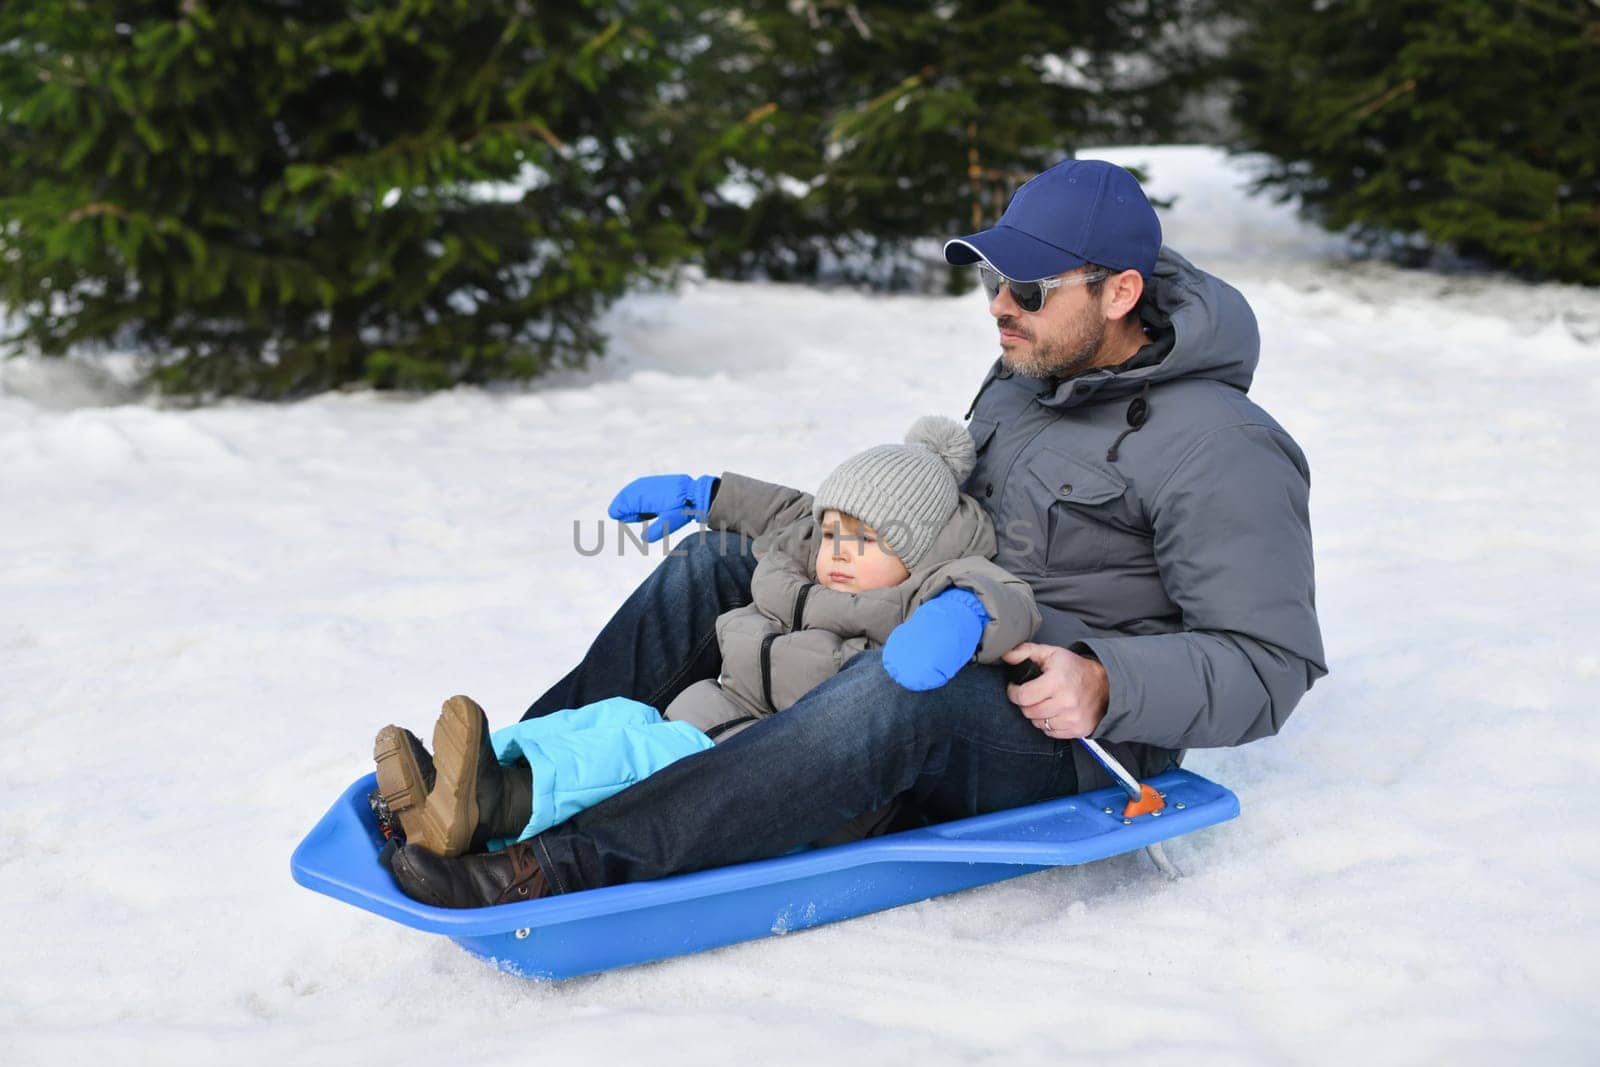 The father with son sledding in the snow